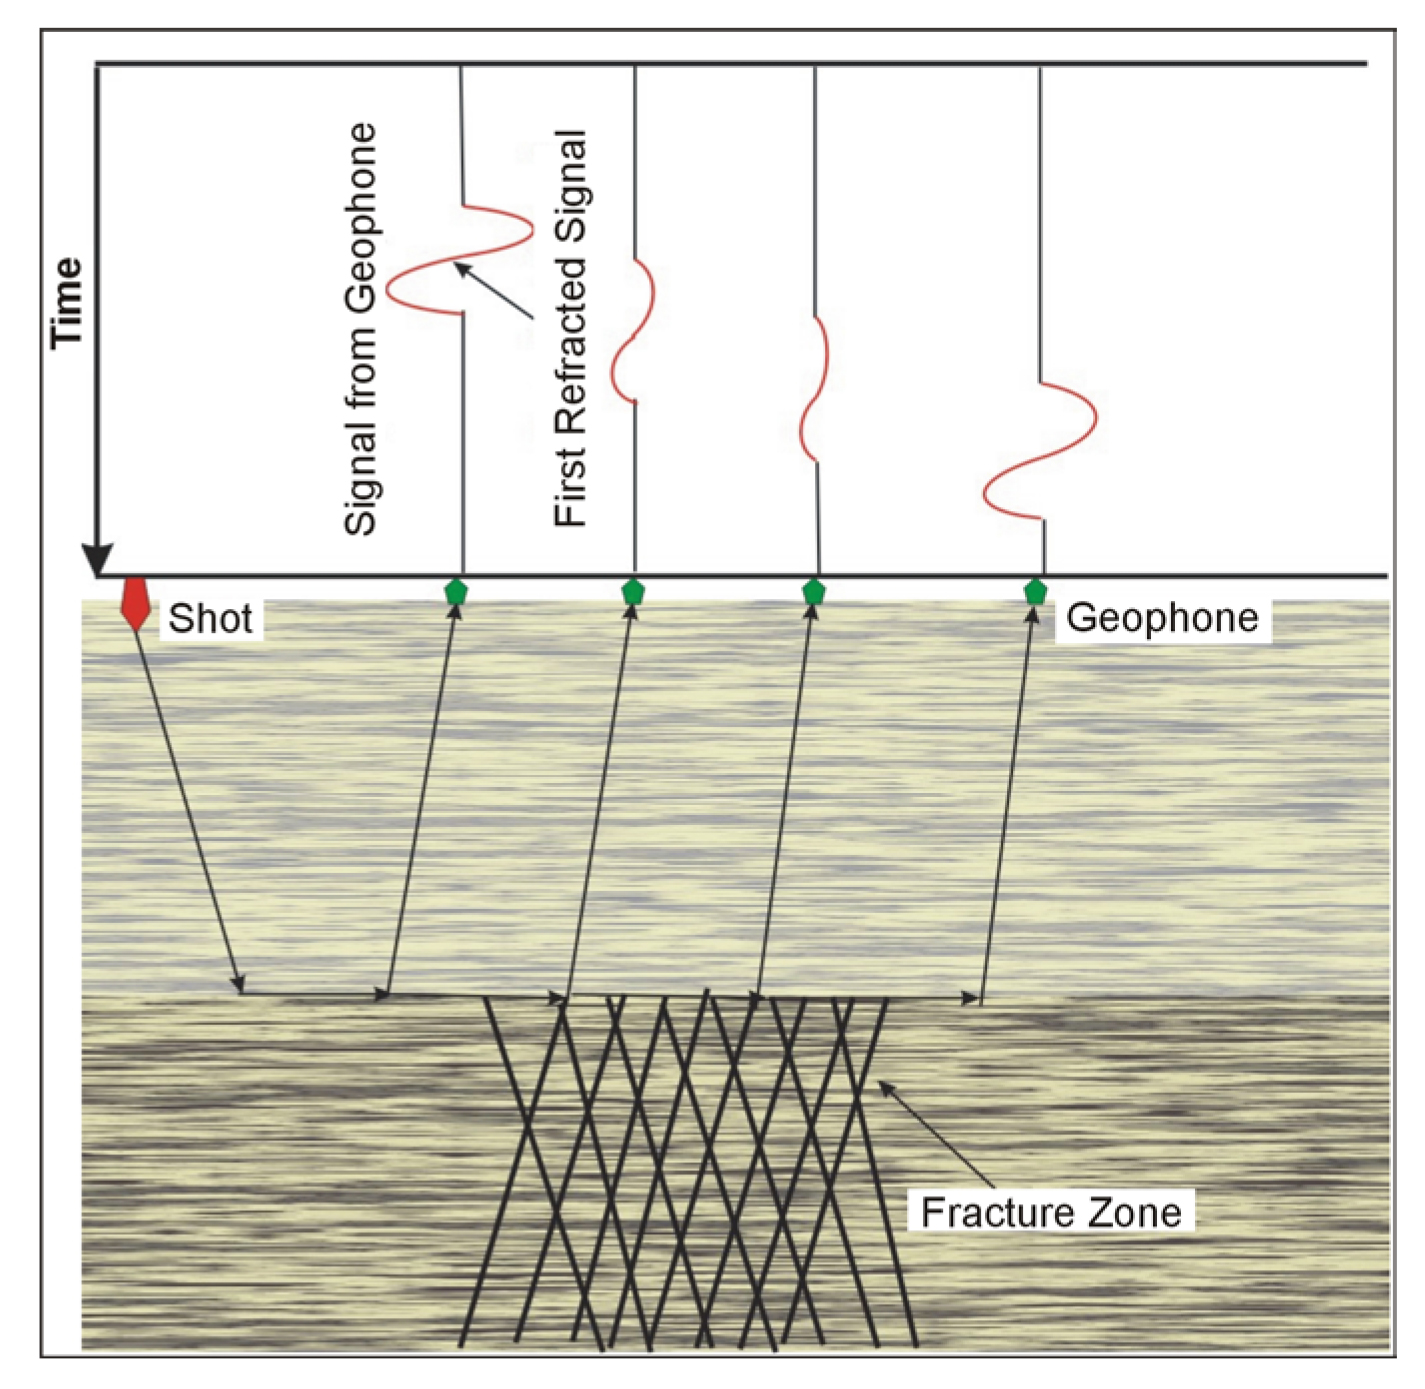 Seismic Refraction for locating  fracture zones.